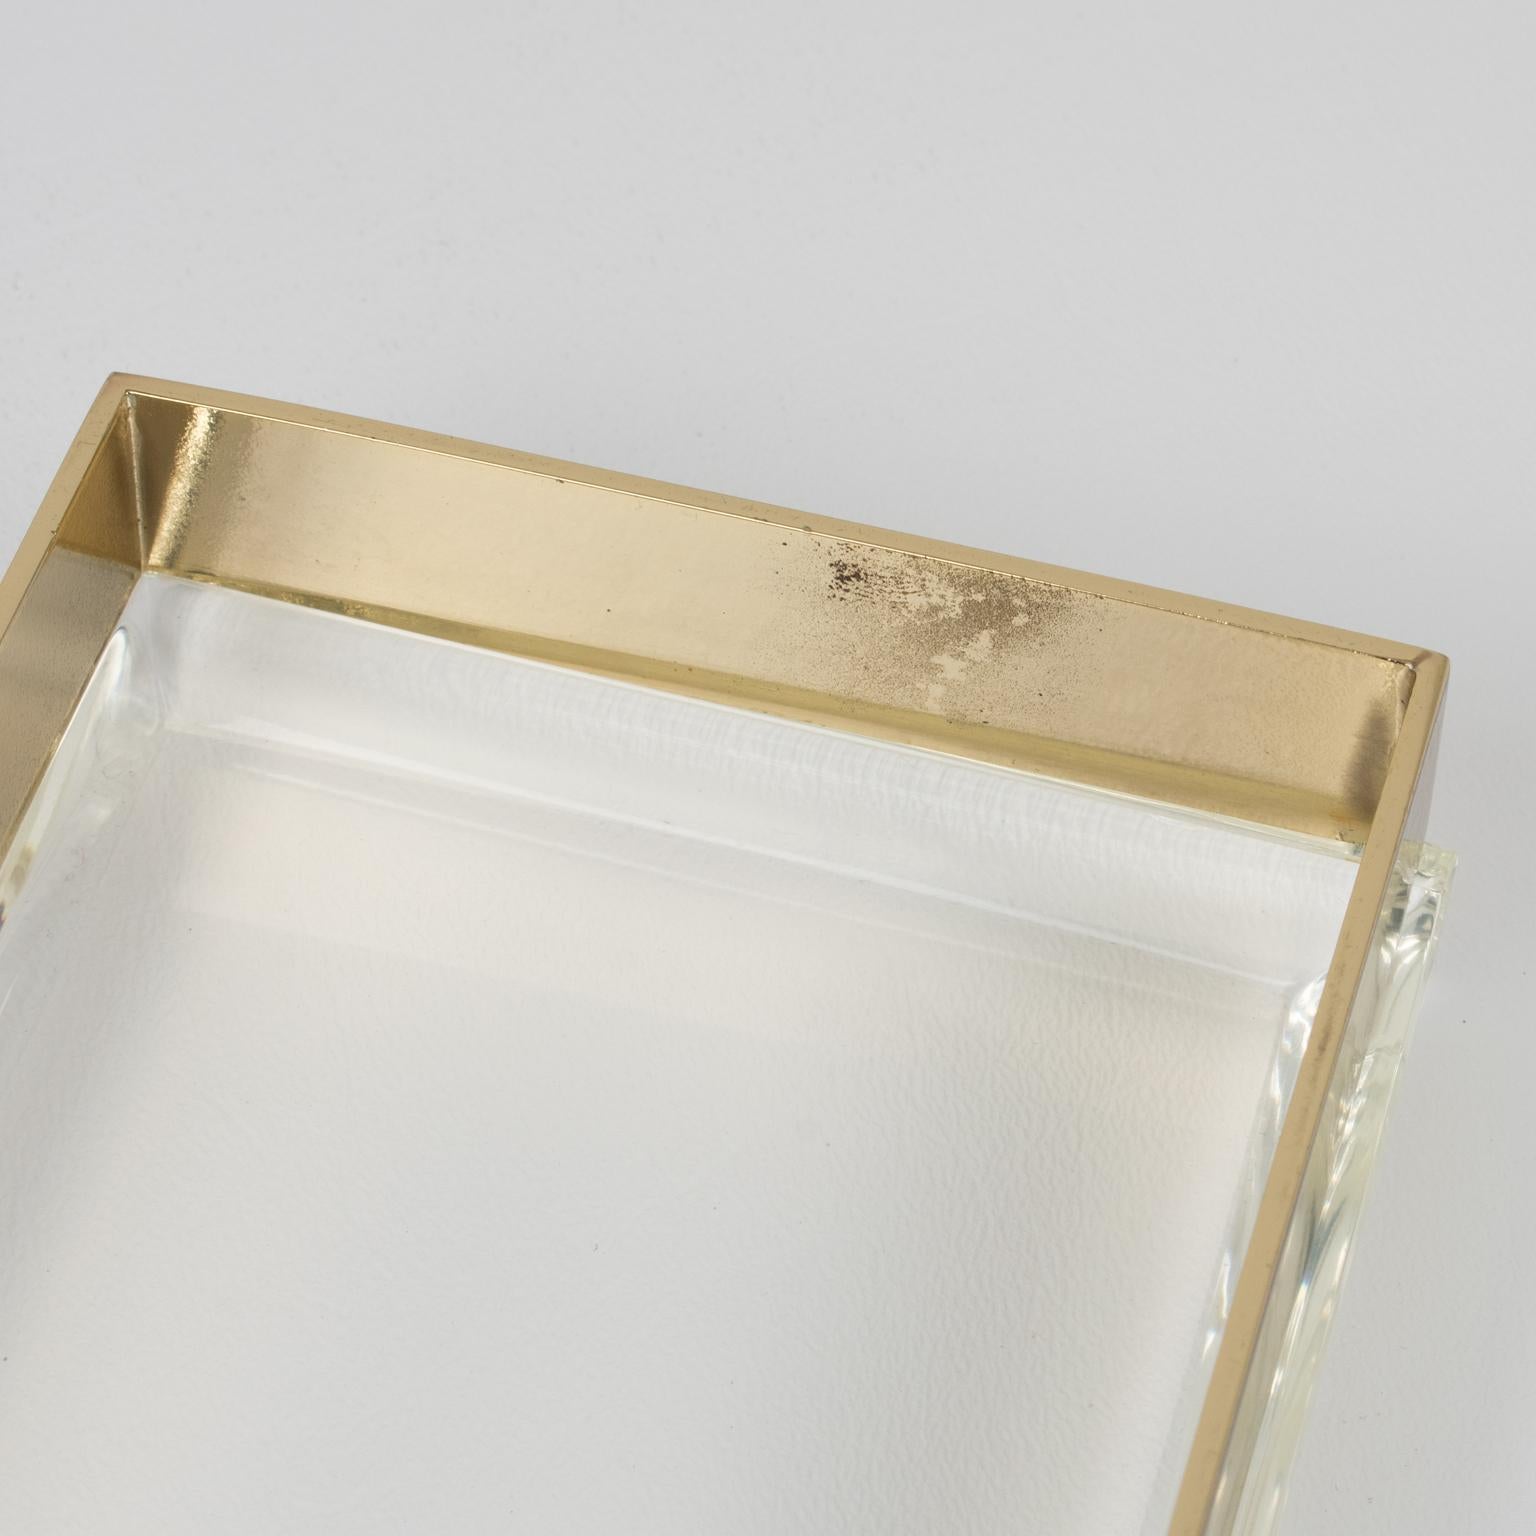 Philippe Cheverny Style Geometric Lucite and Gilded Metal Box, France 1970s For Sale 2